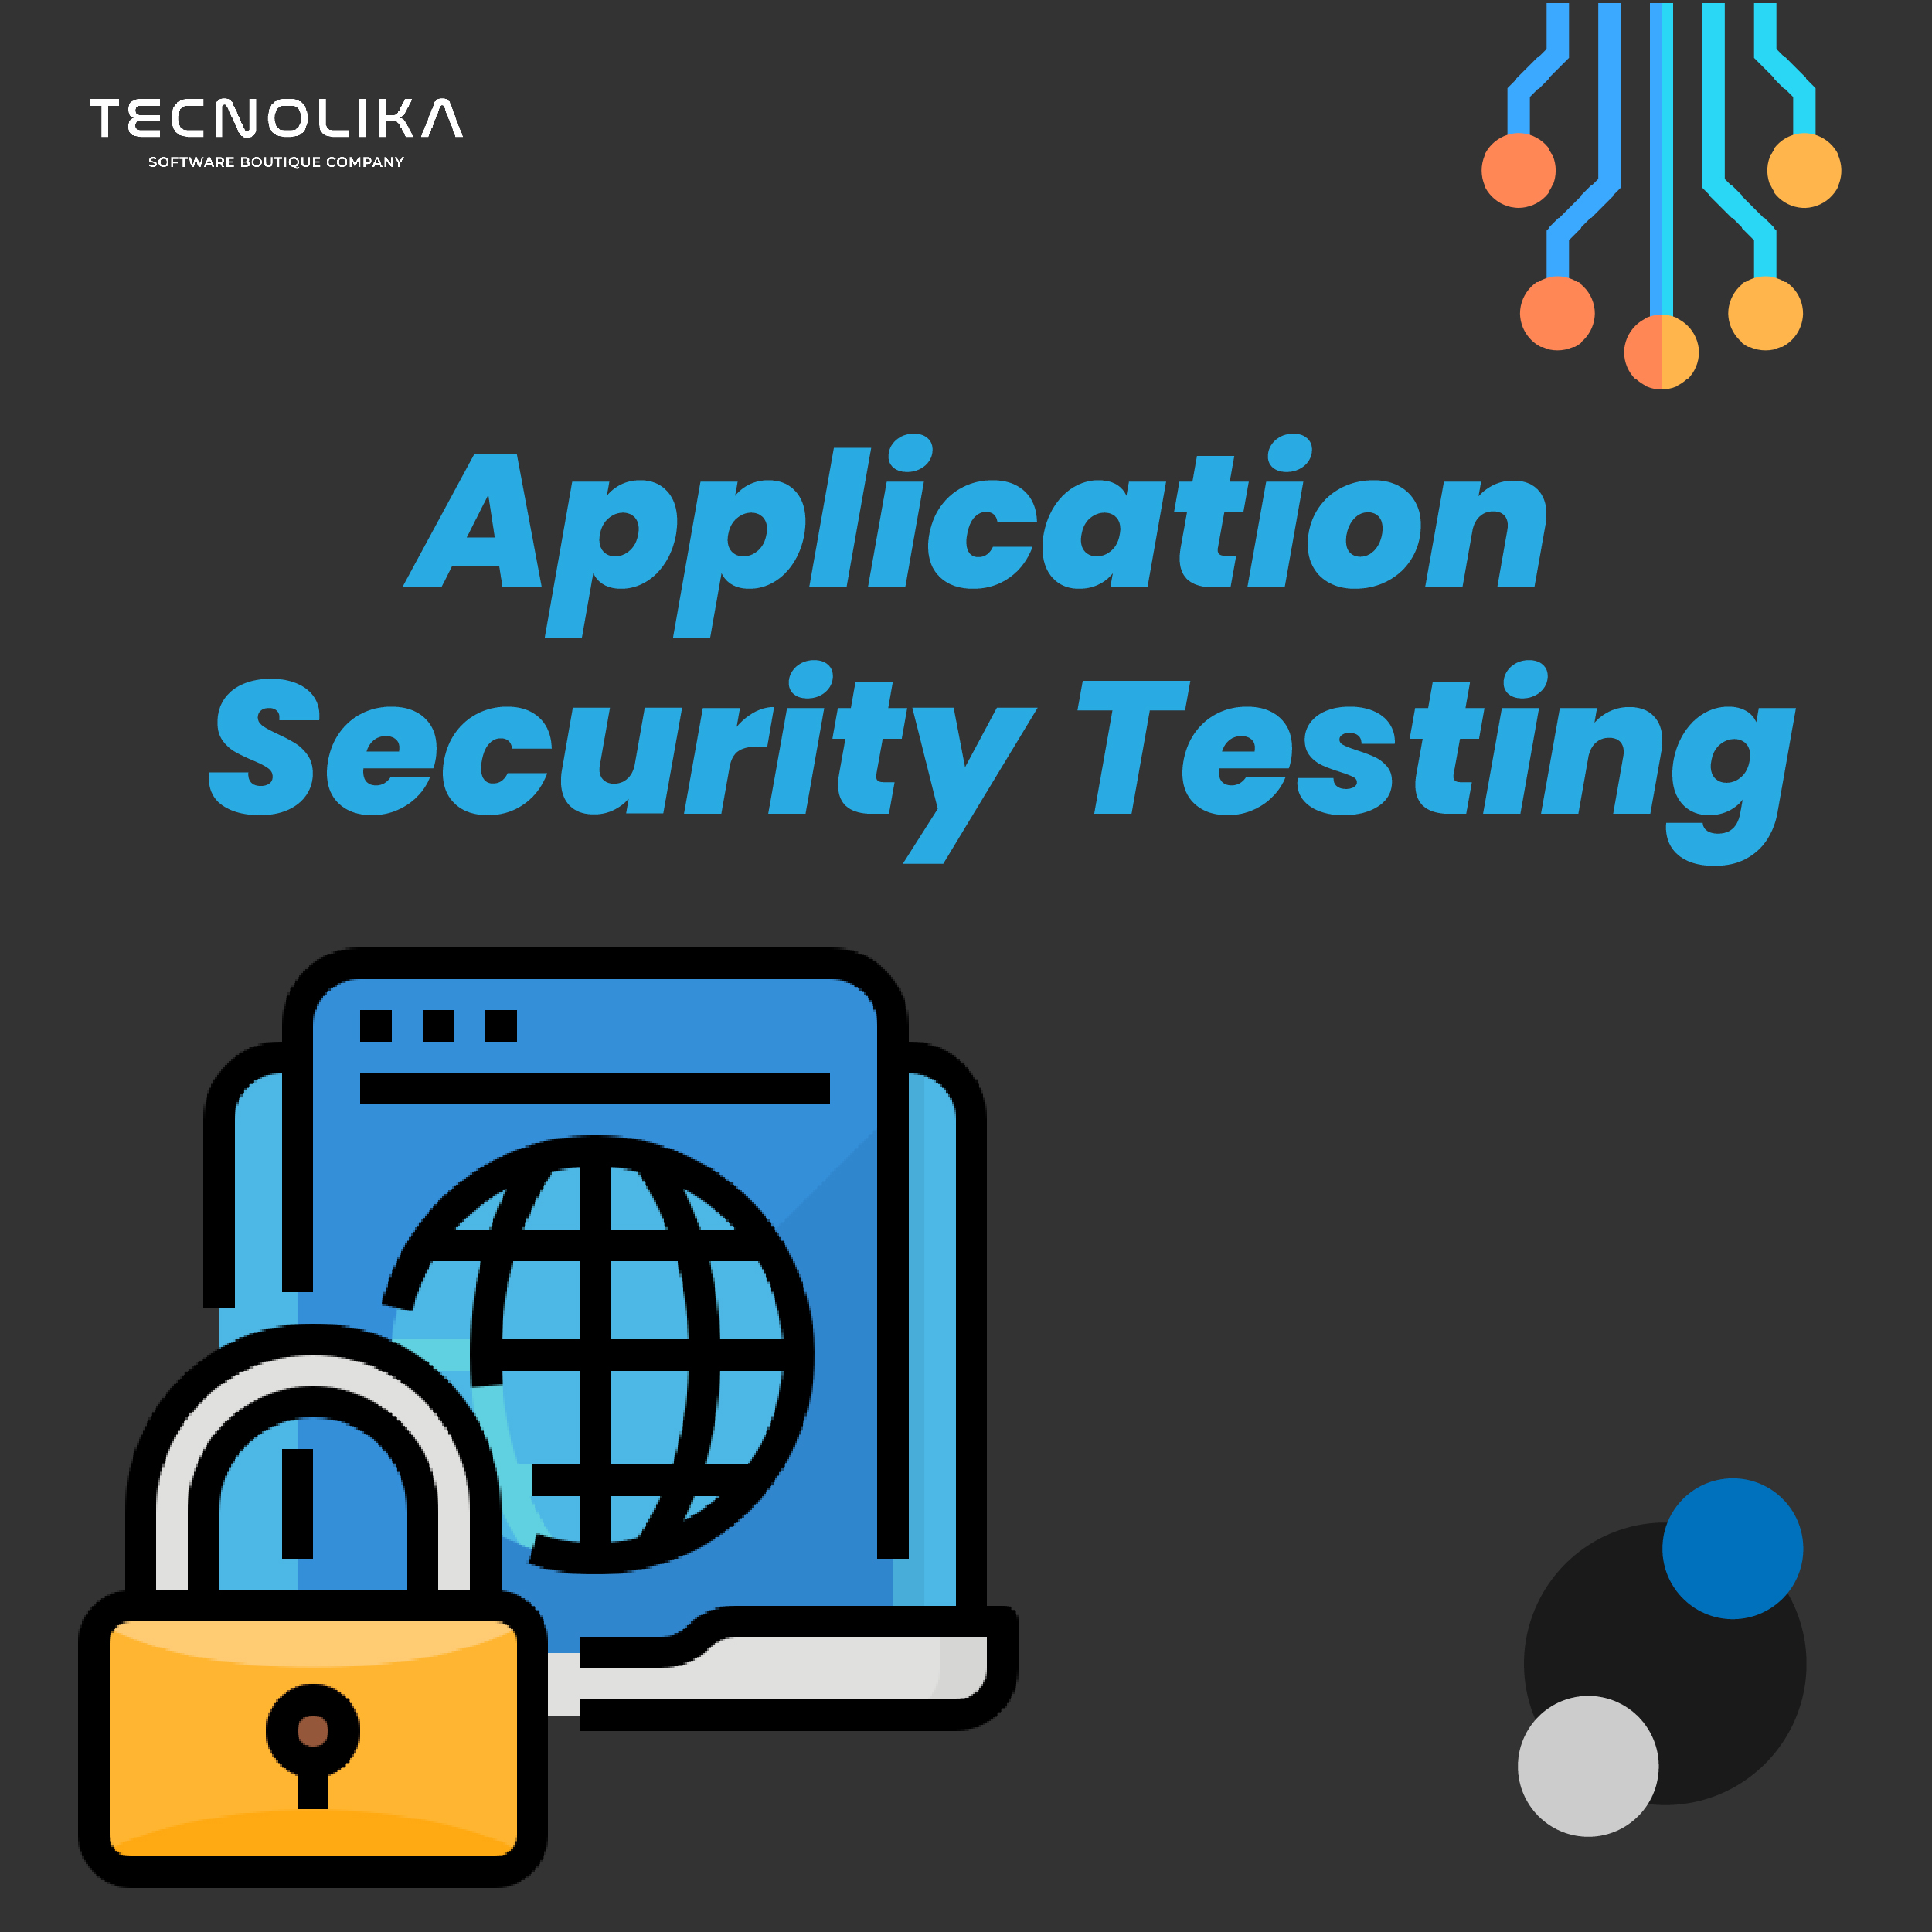 Illustration of application security testing concept